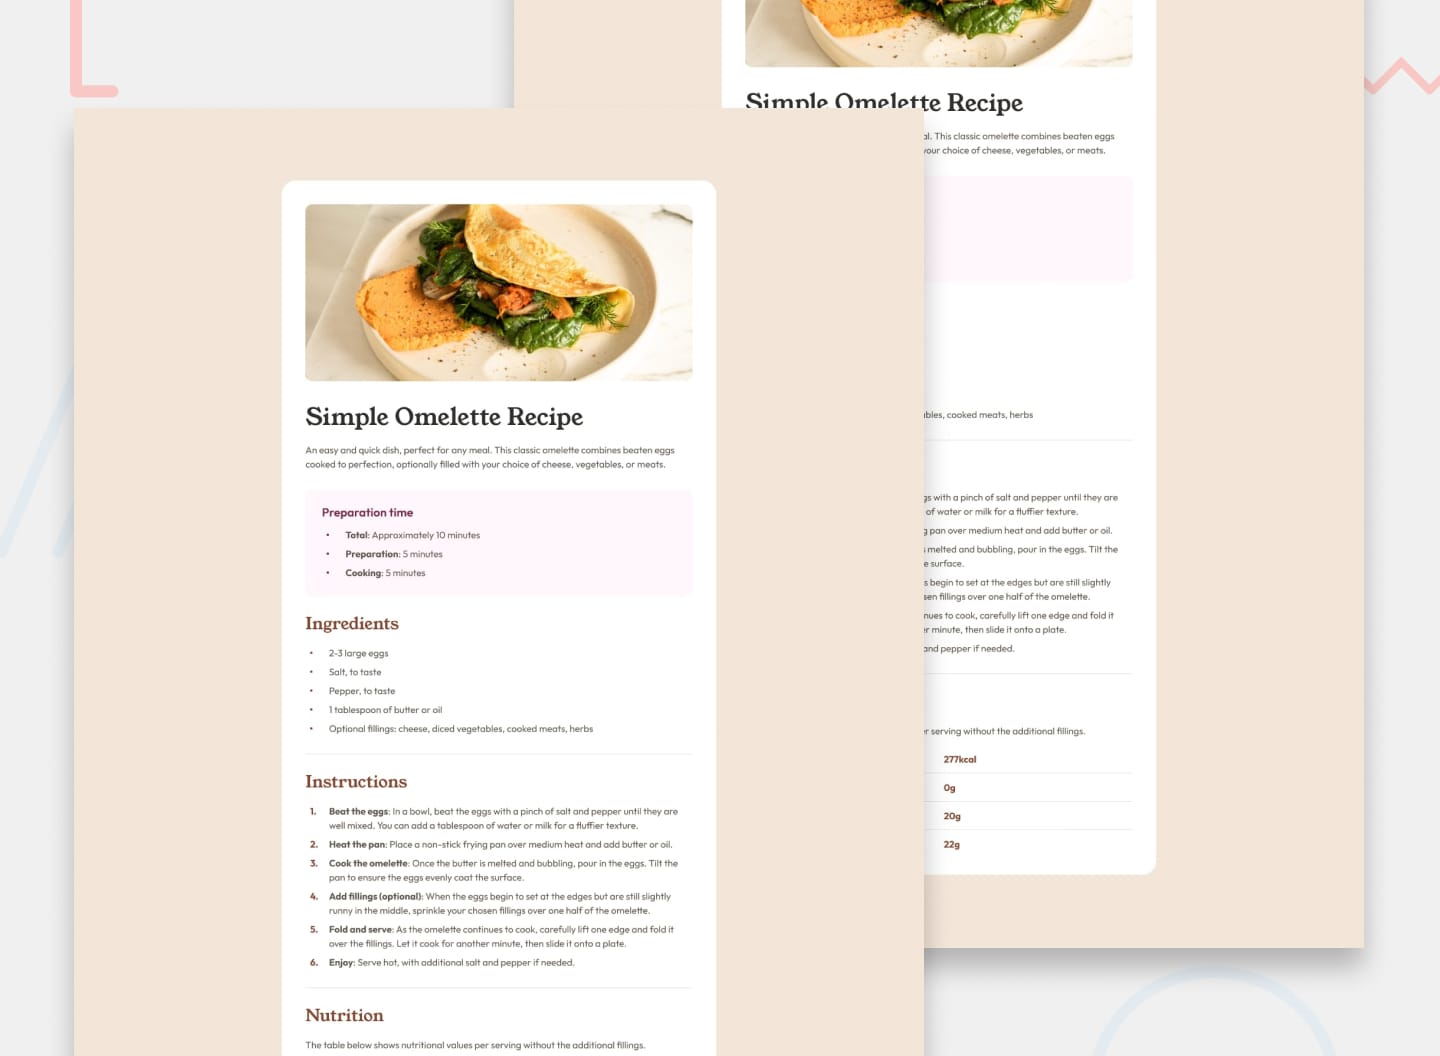 A preview image for the Recipe page